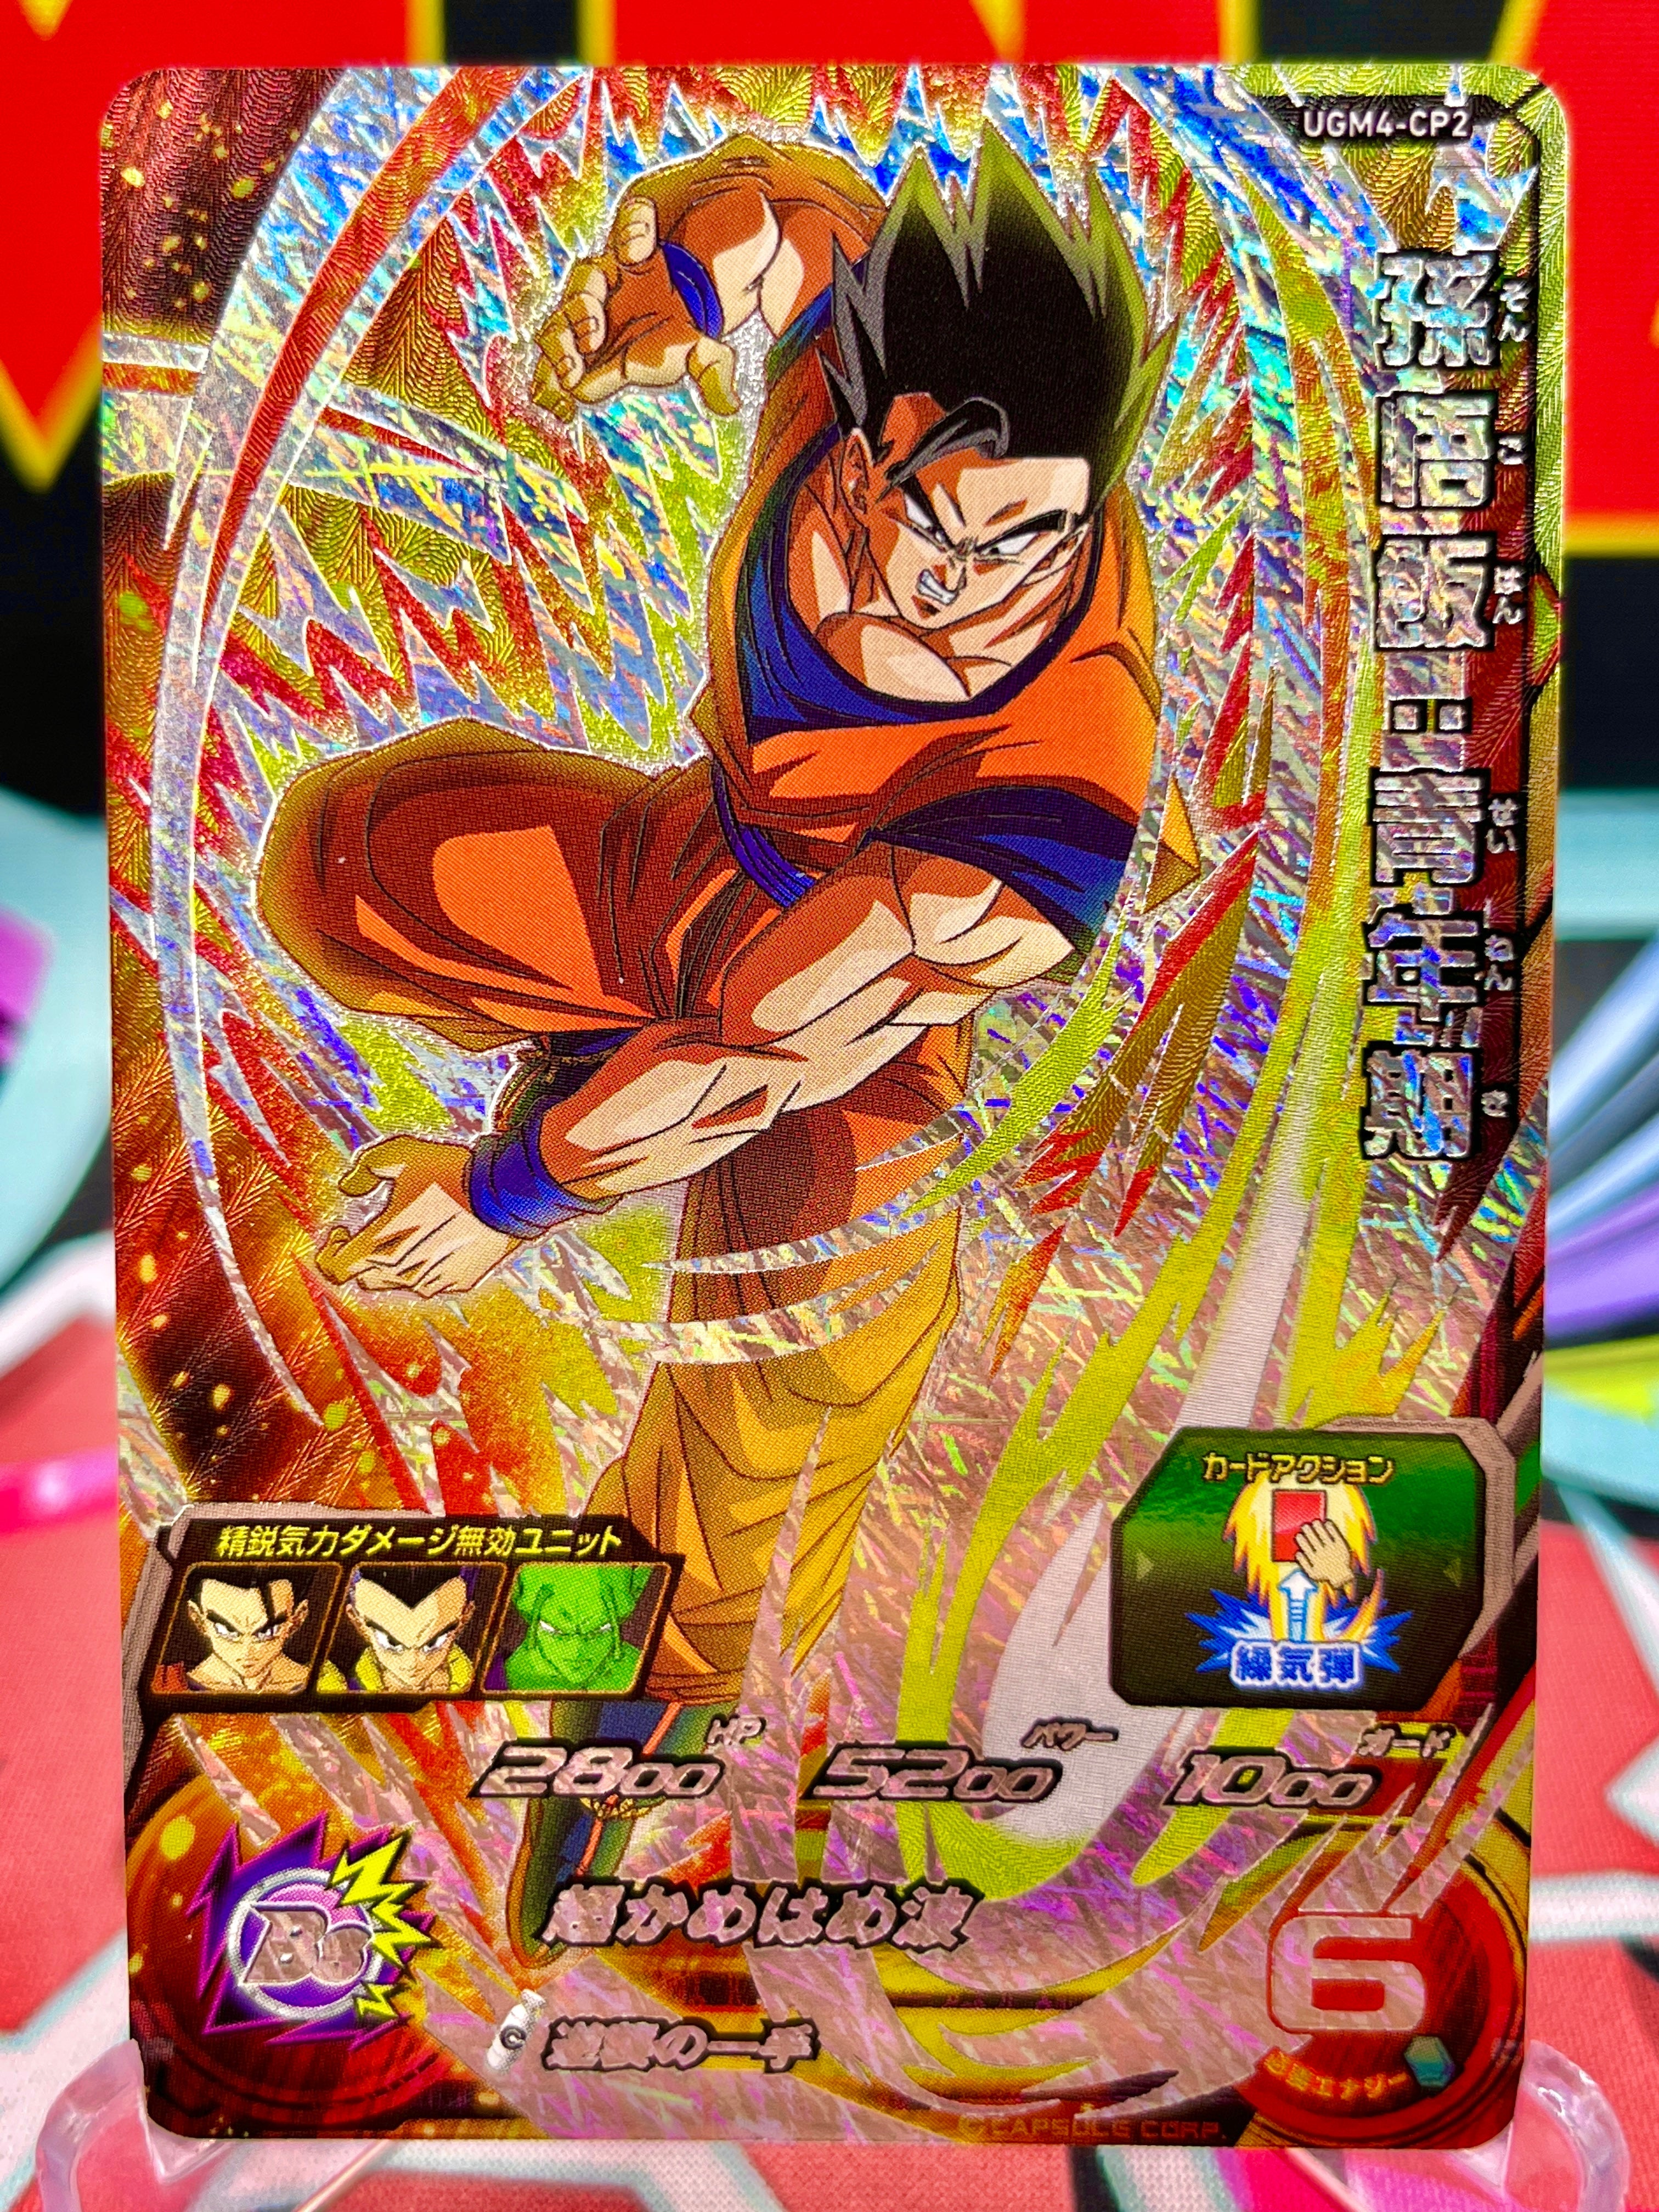 UGM4-CP2 Son Gohan: Youth CP (2022)